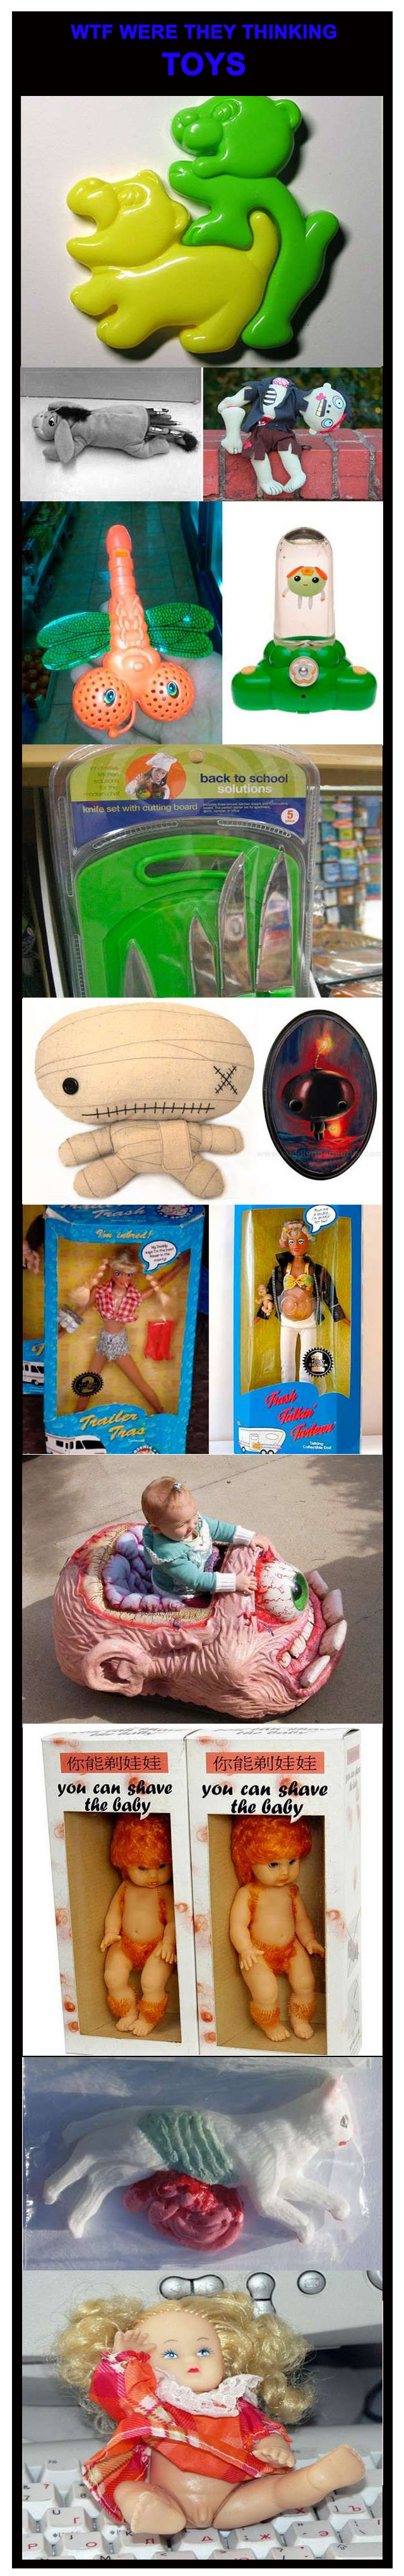 Weird Toys Comp. . you can have. 4th one